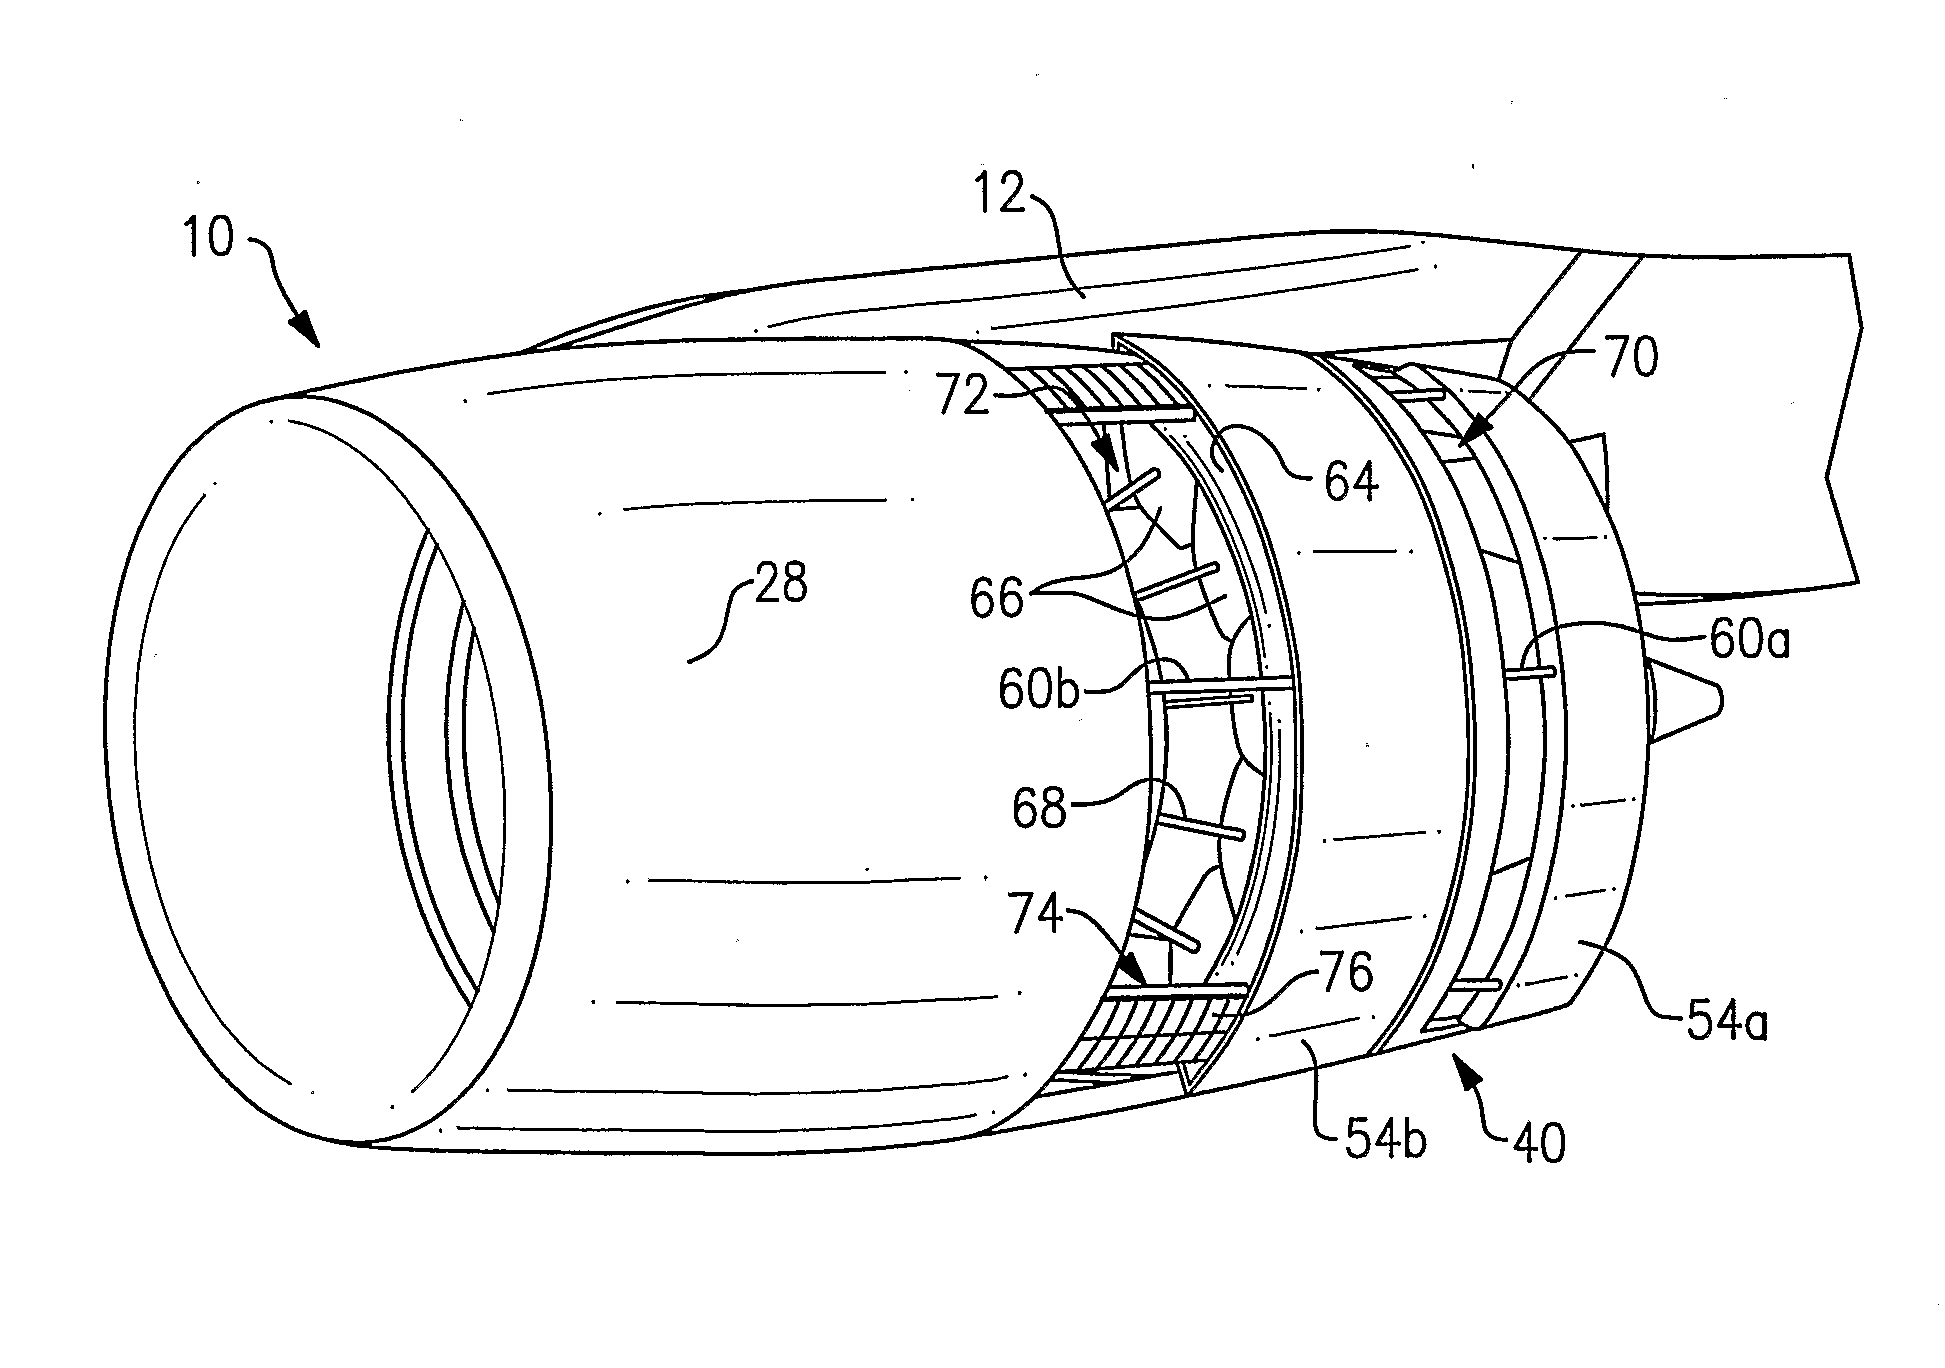 Tri-body variable area fan nozzle and thrust reverser